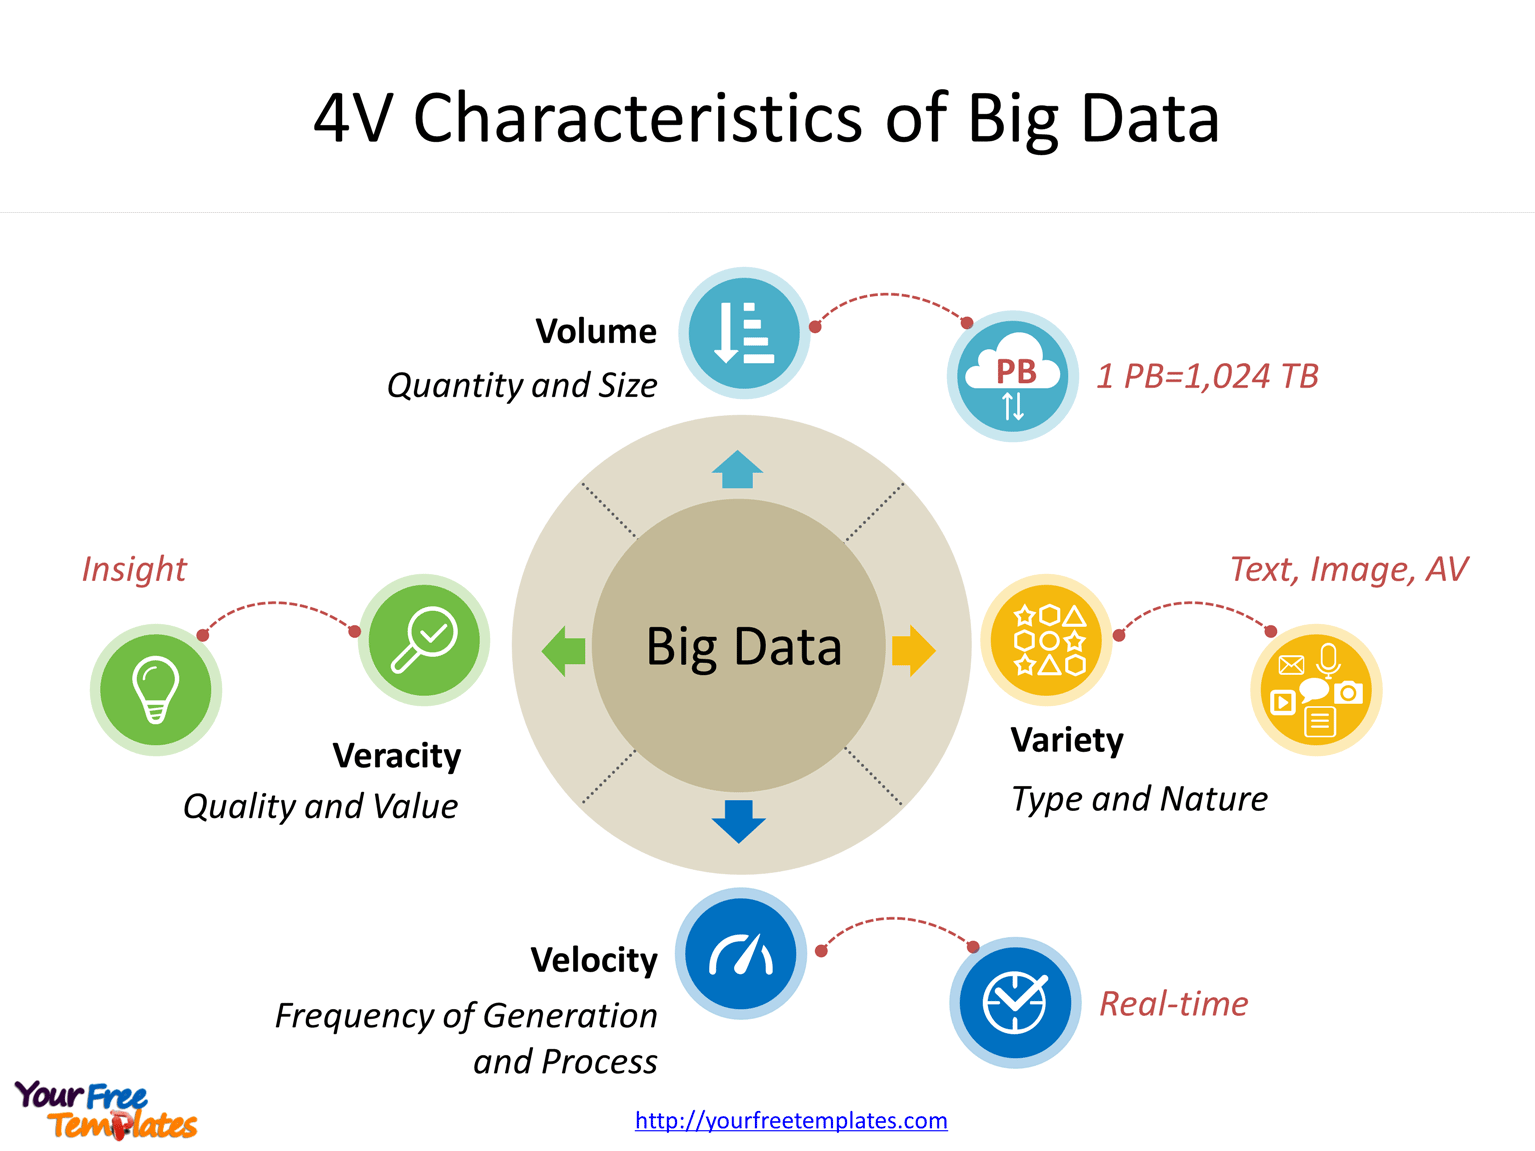 5C Architecture of Big Data for Manufacturing Applications diagram